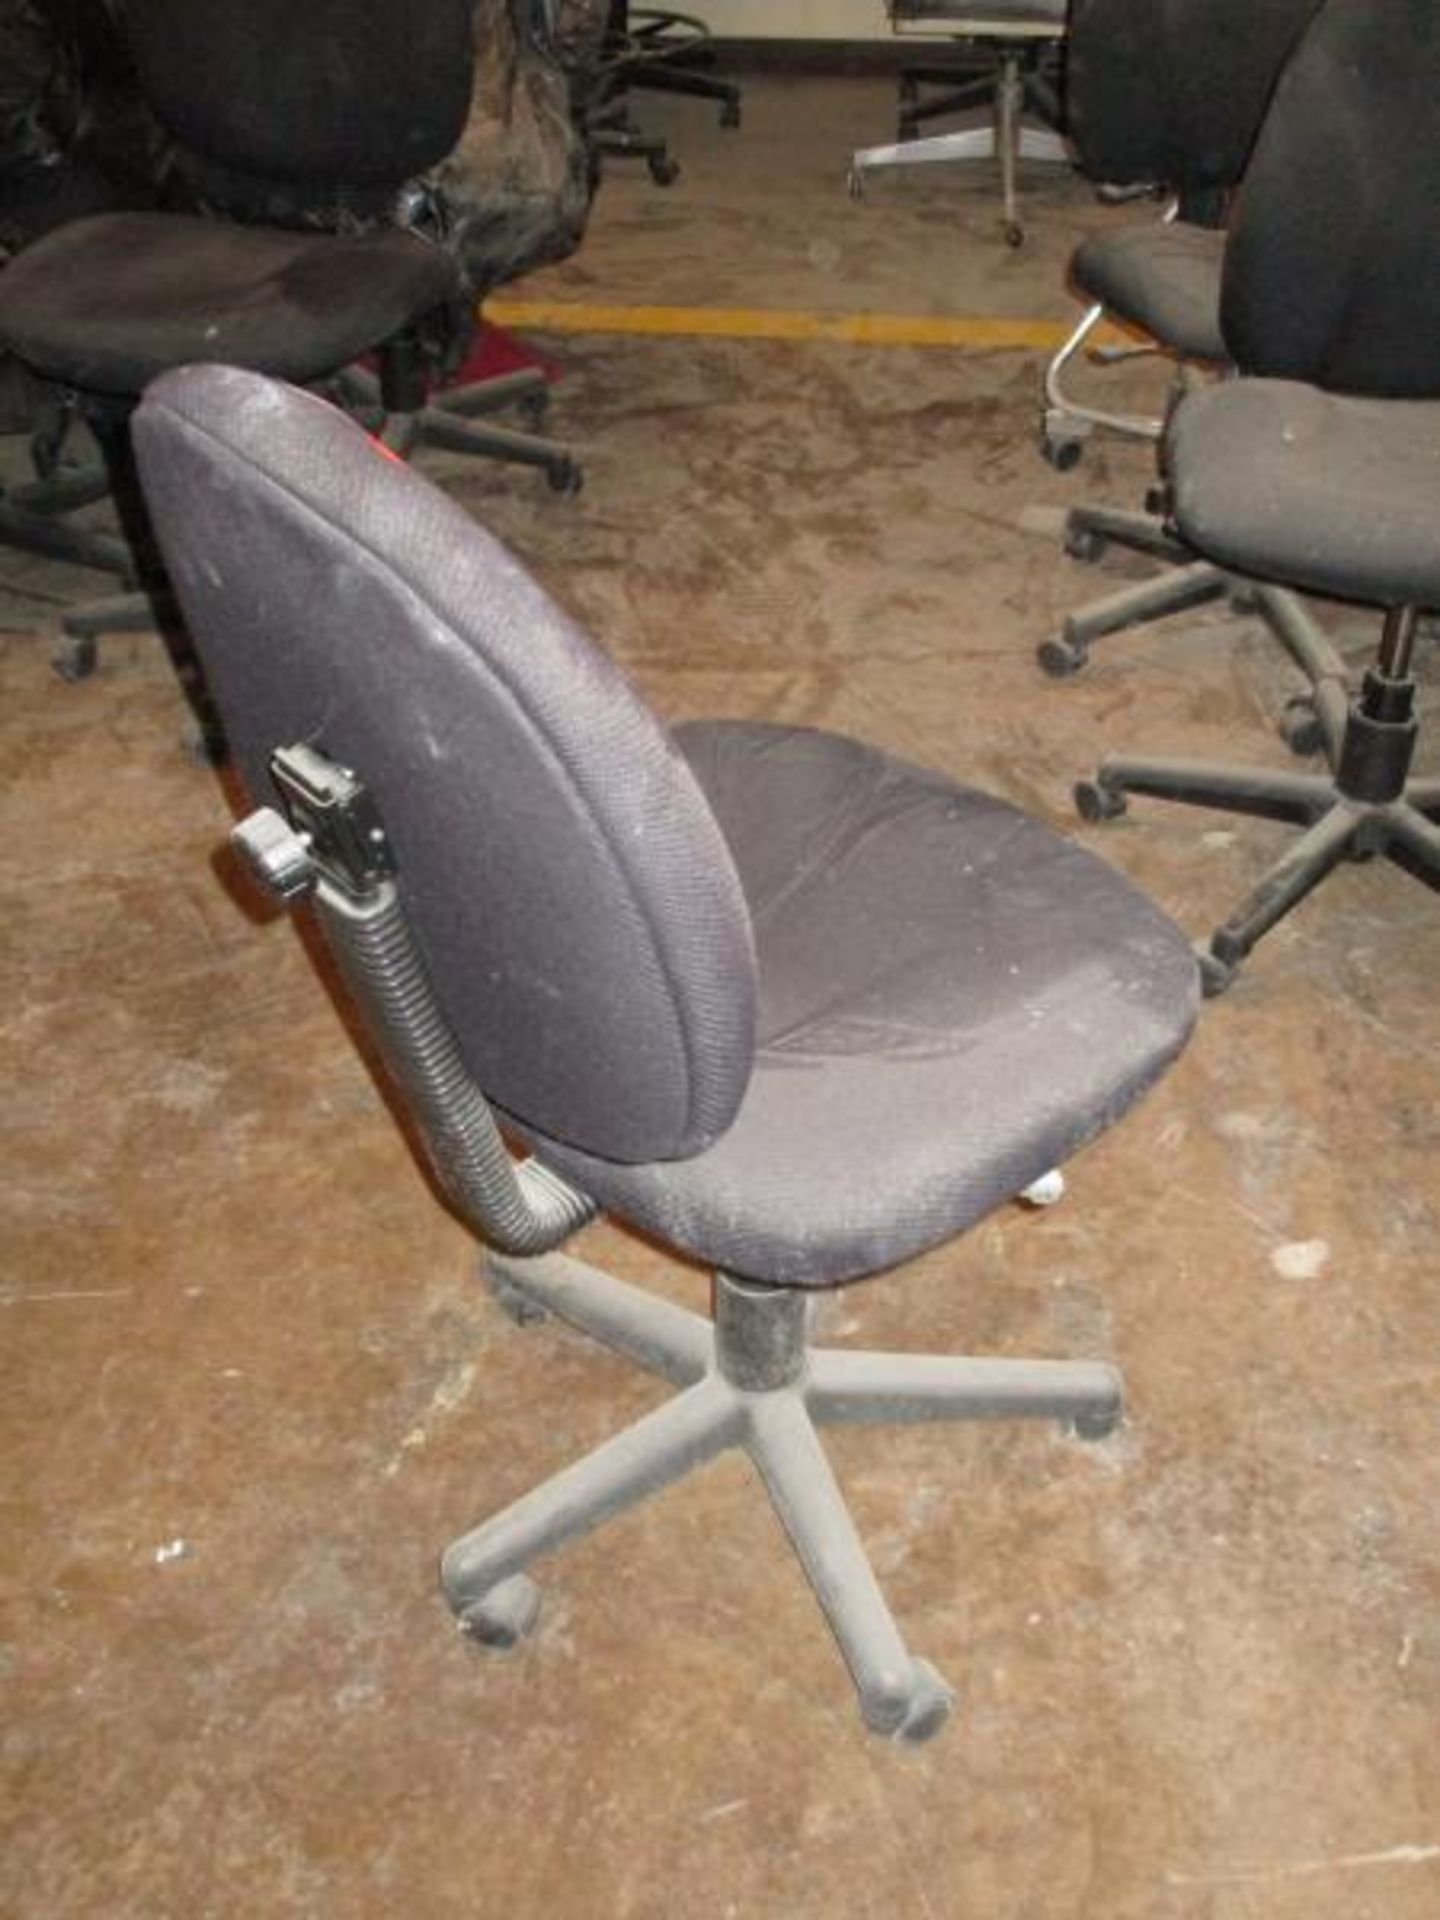 (10) Assorted Office Chairs on Casters, Fabric Seat / Back - 1 w/ Broken Back, (1) Rolling Stool - Image 8 of 14